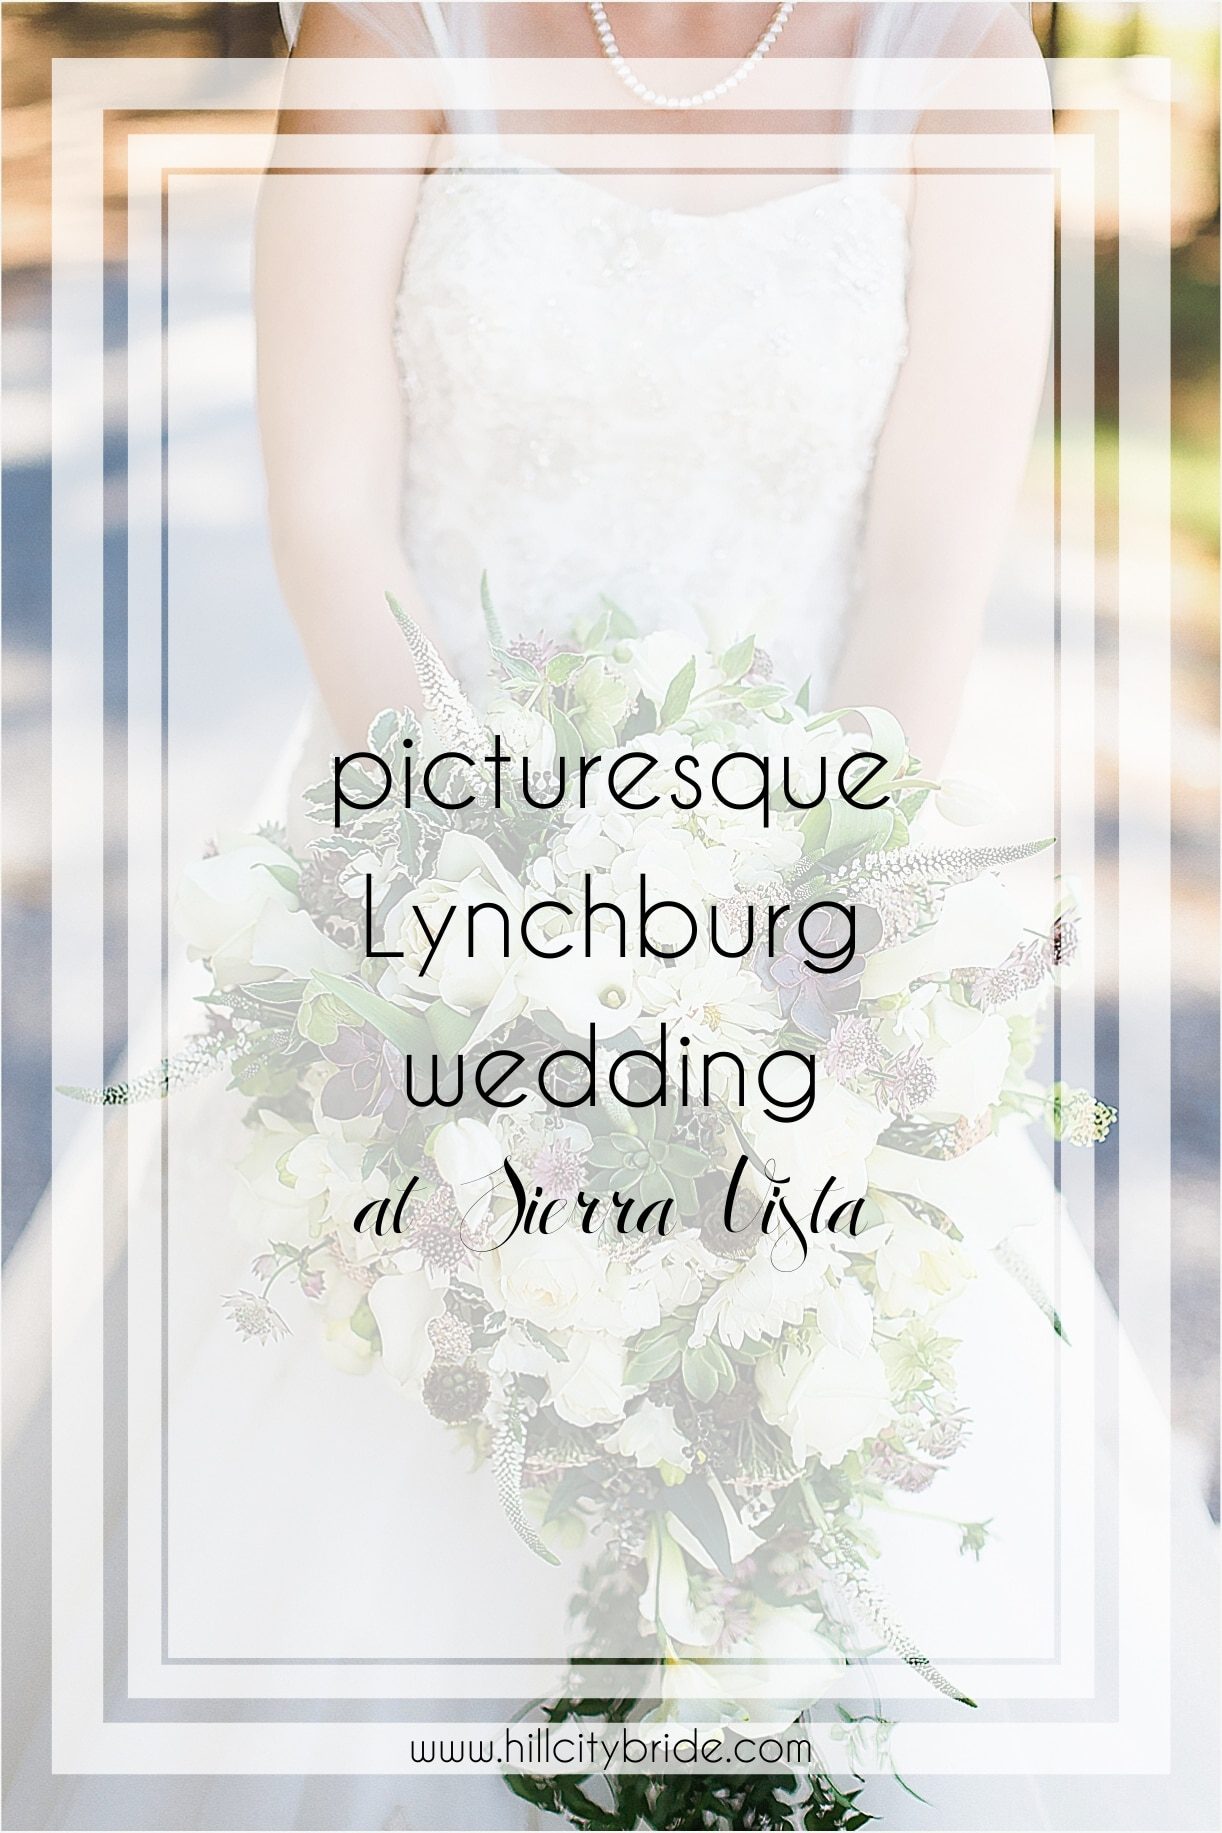 How to Have a Picturesque Lynchburg Wedding at Sierra Vista